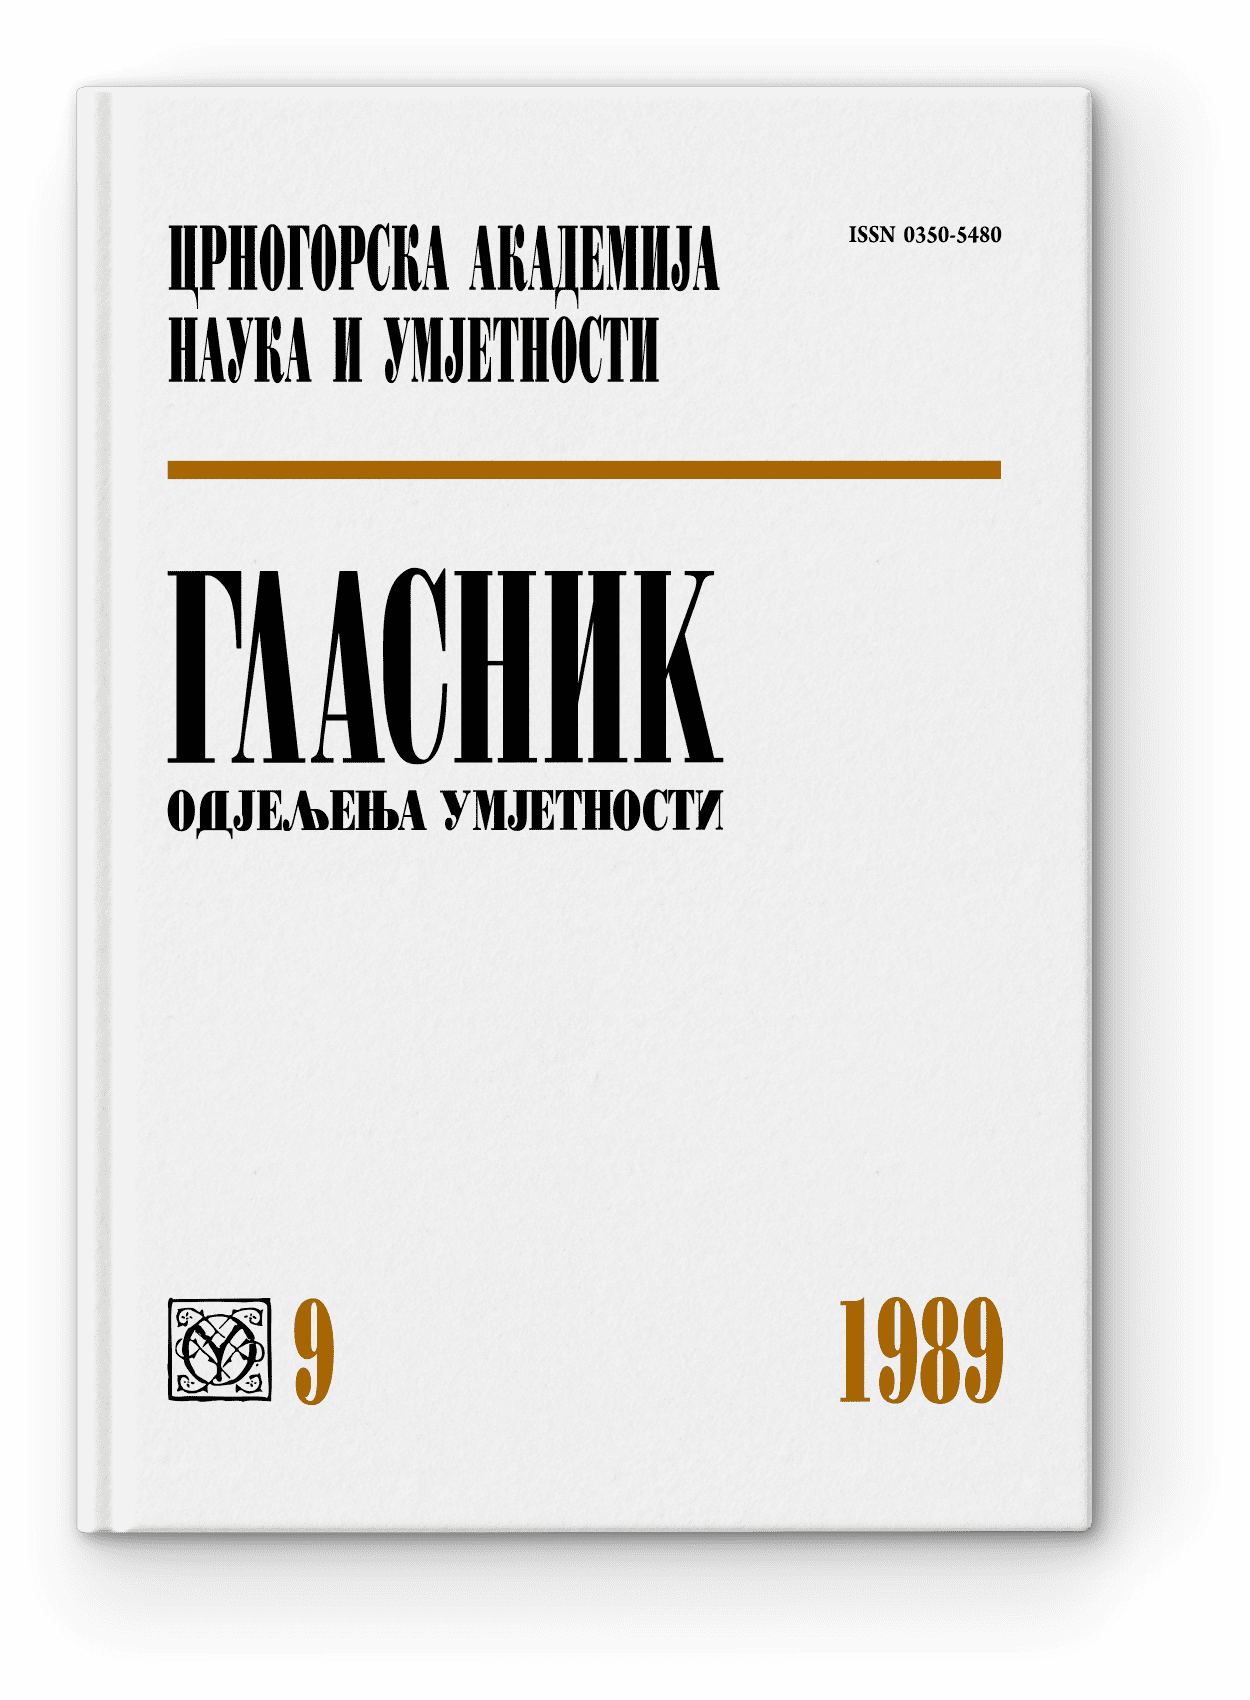 Proceedings of the Department of Arts, 9/1989